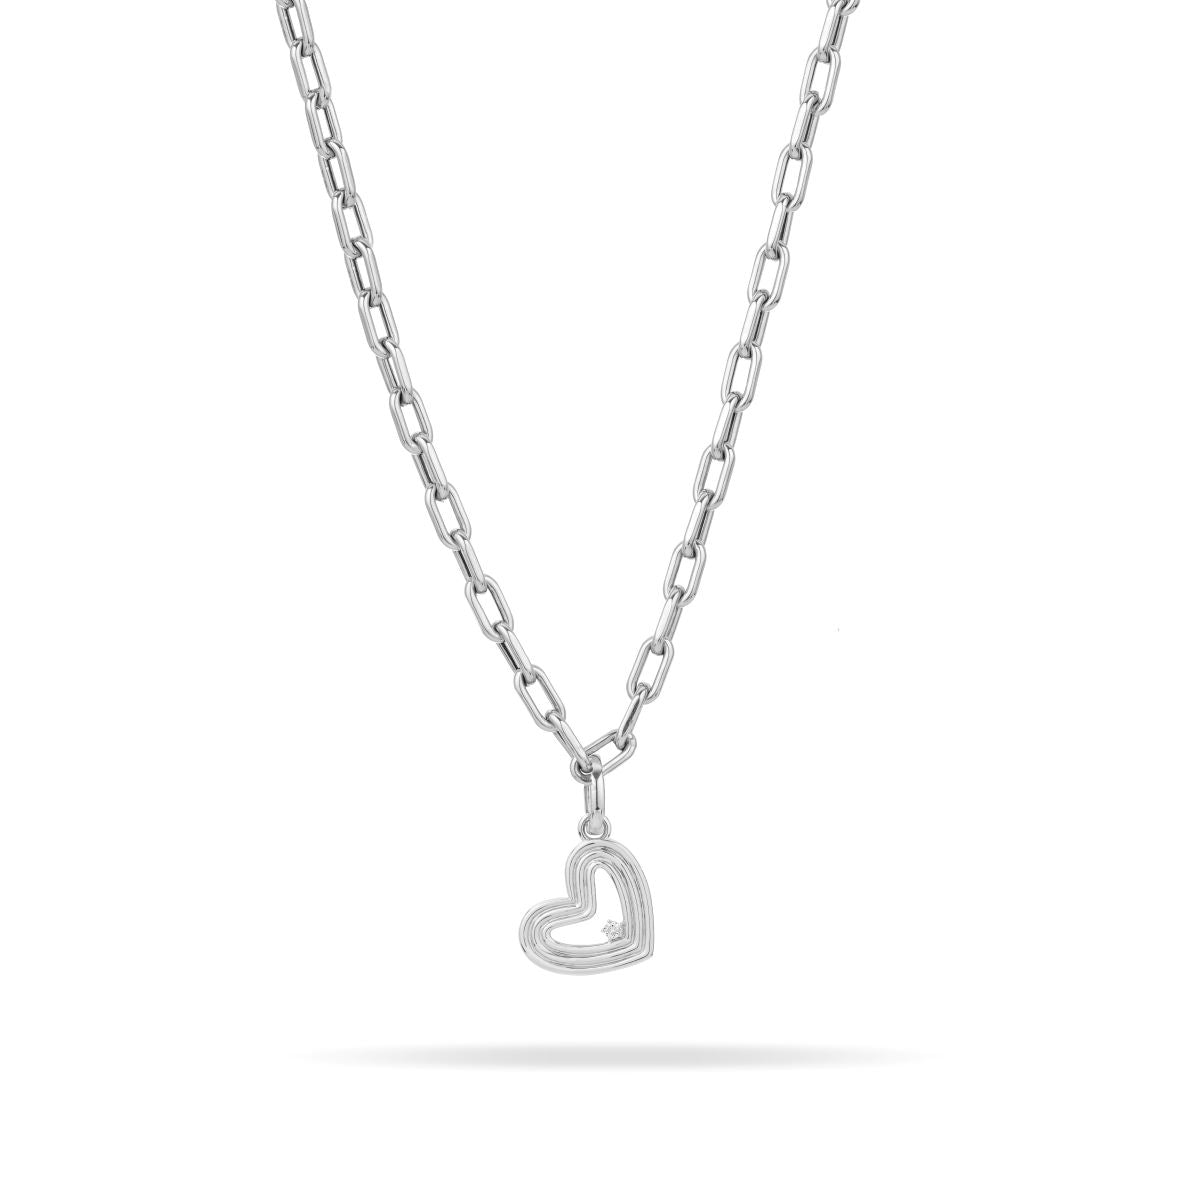 Groovy Diamond Heart Hinged Charm in Sterling Silver